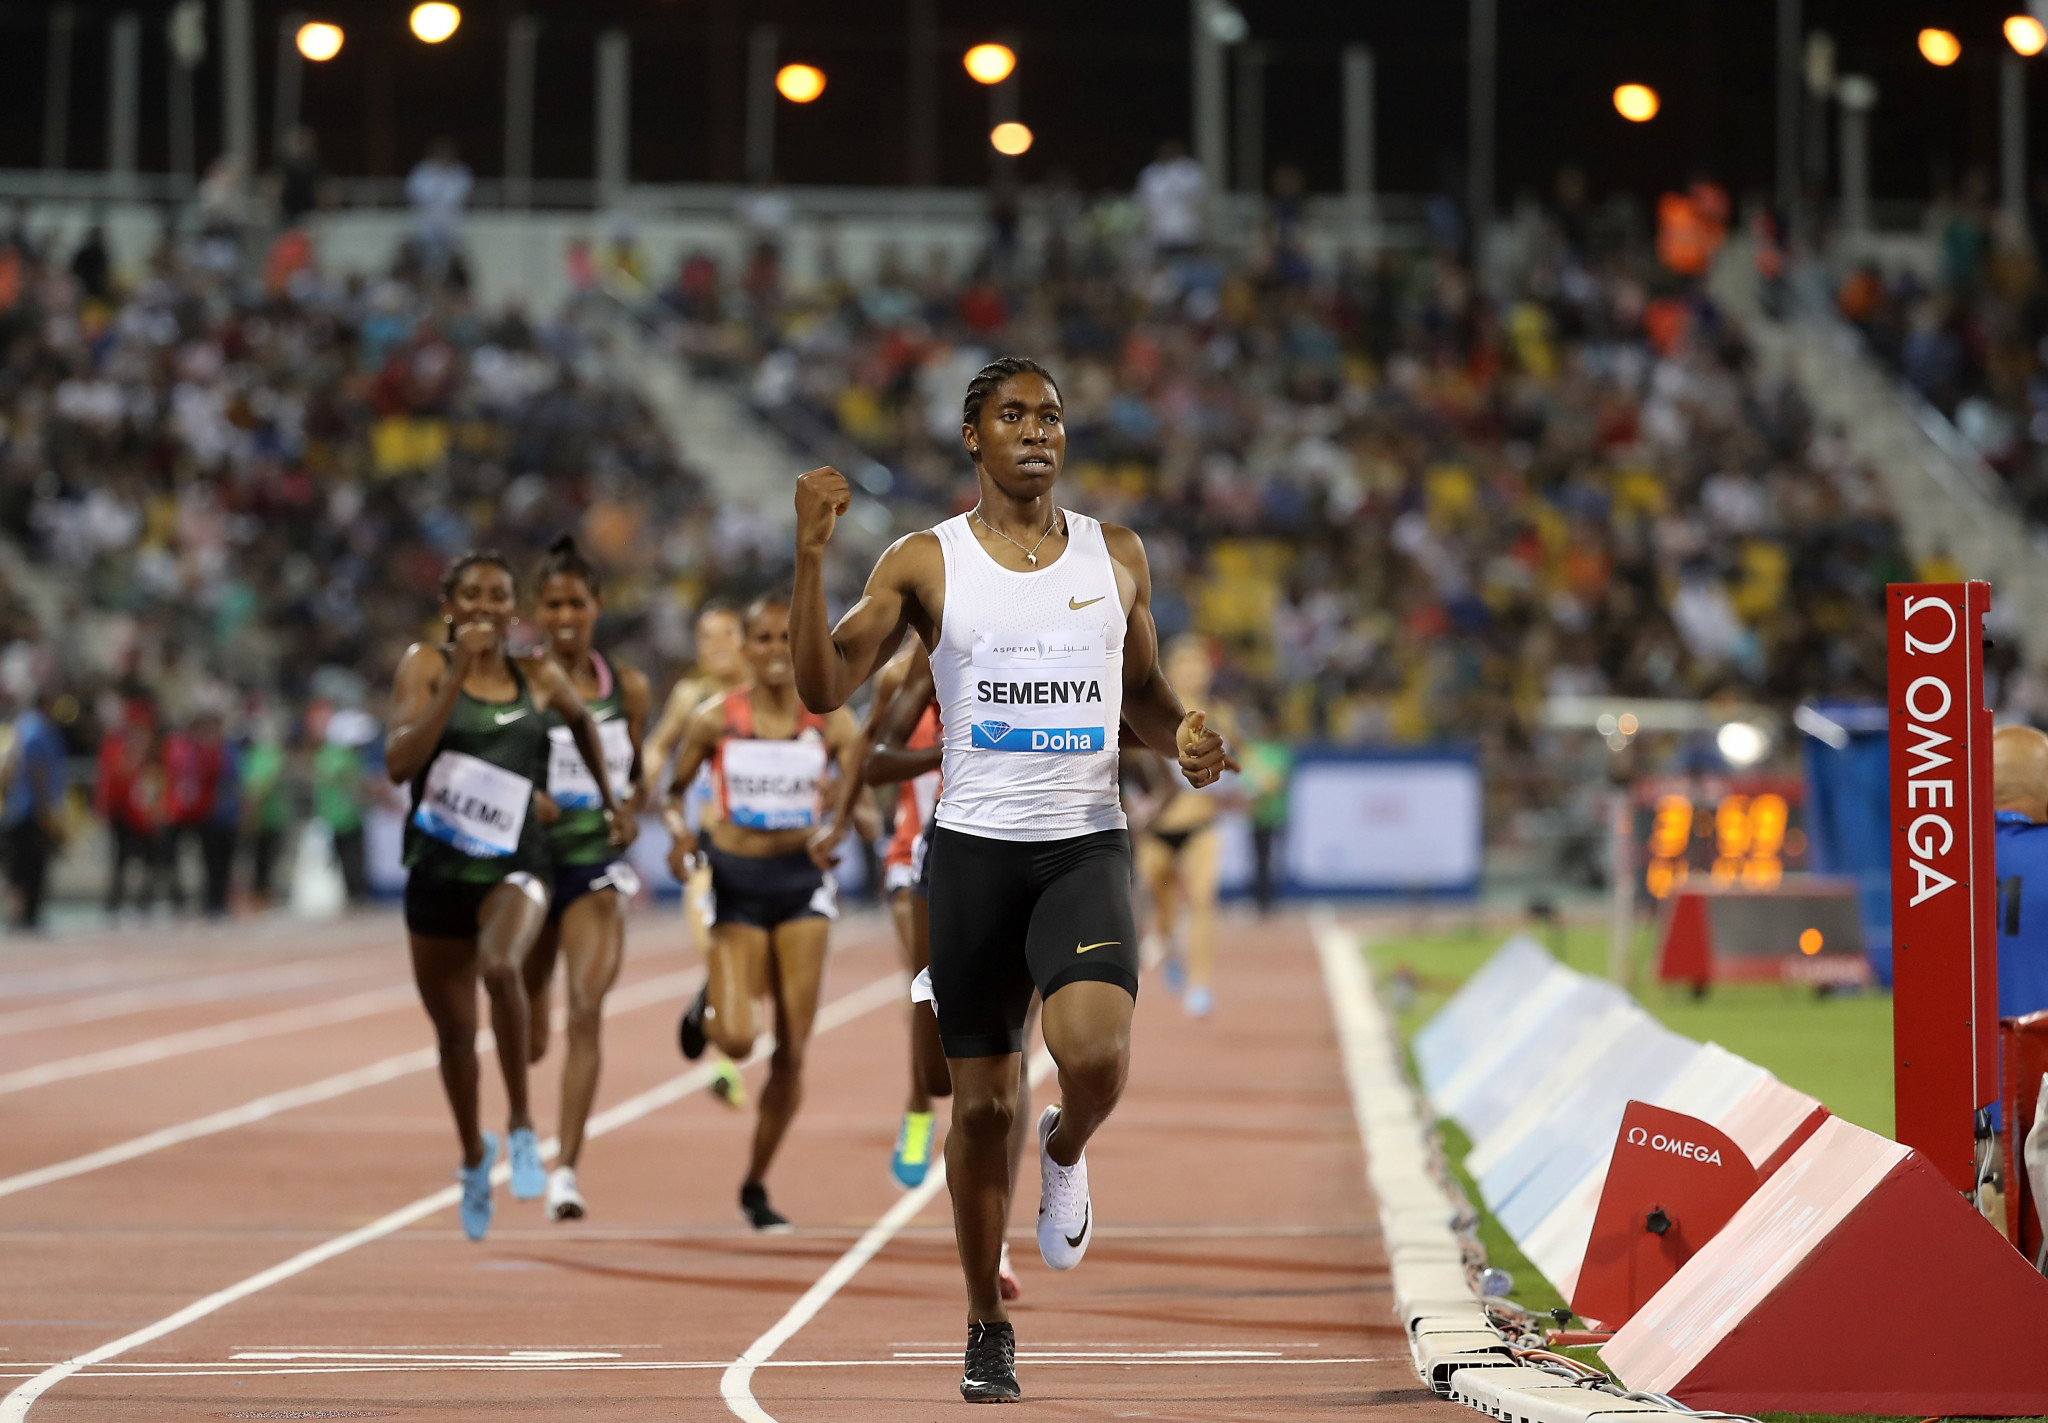  Semenya puts controversy aside for a 1500m best in dazzling IAAF Diamond League opener at Doha